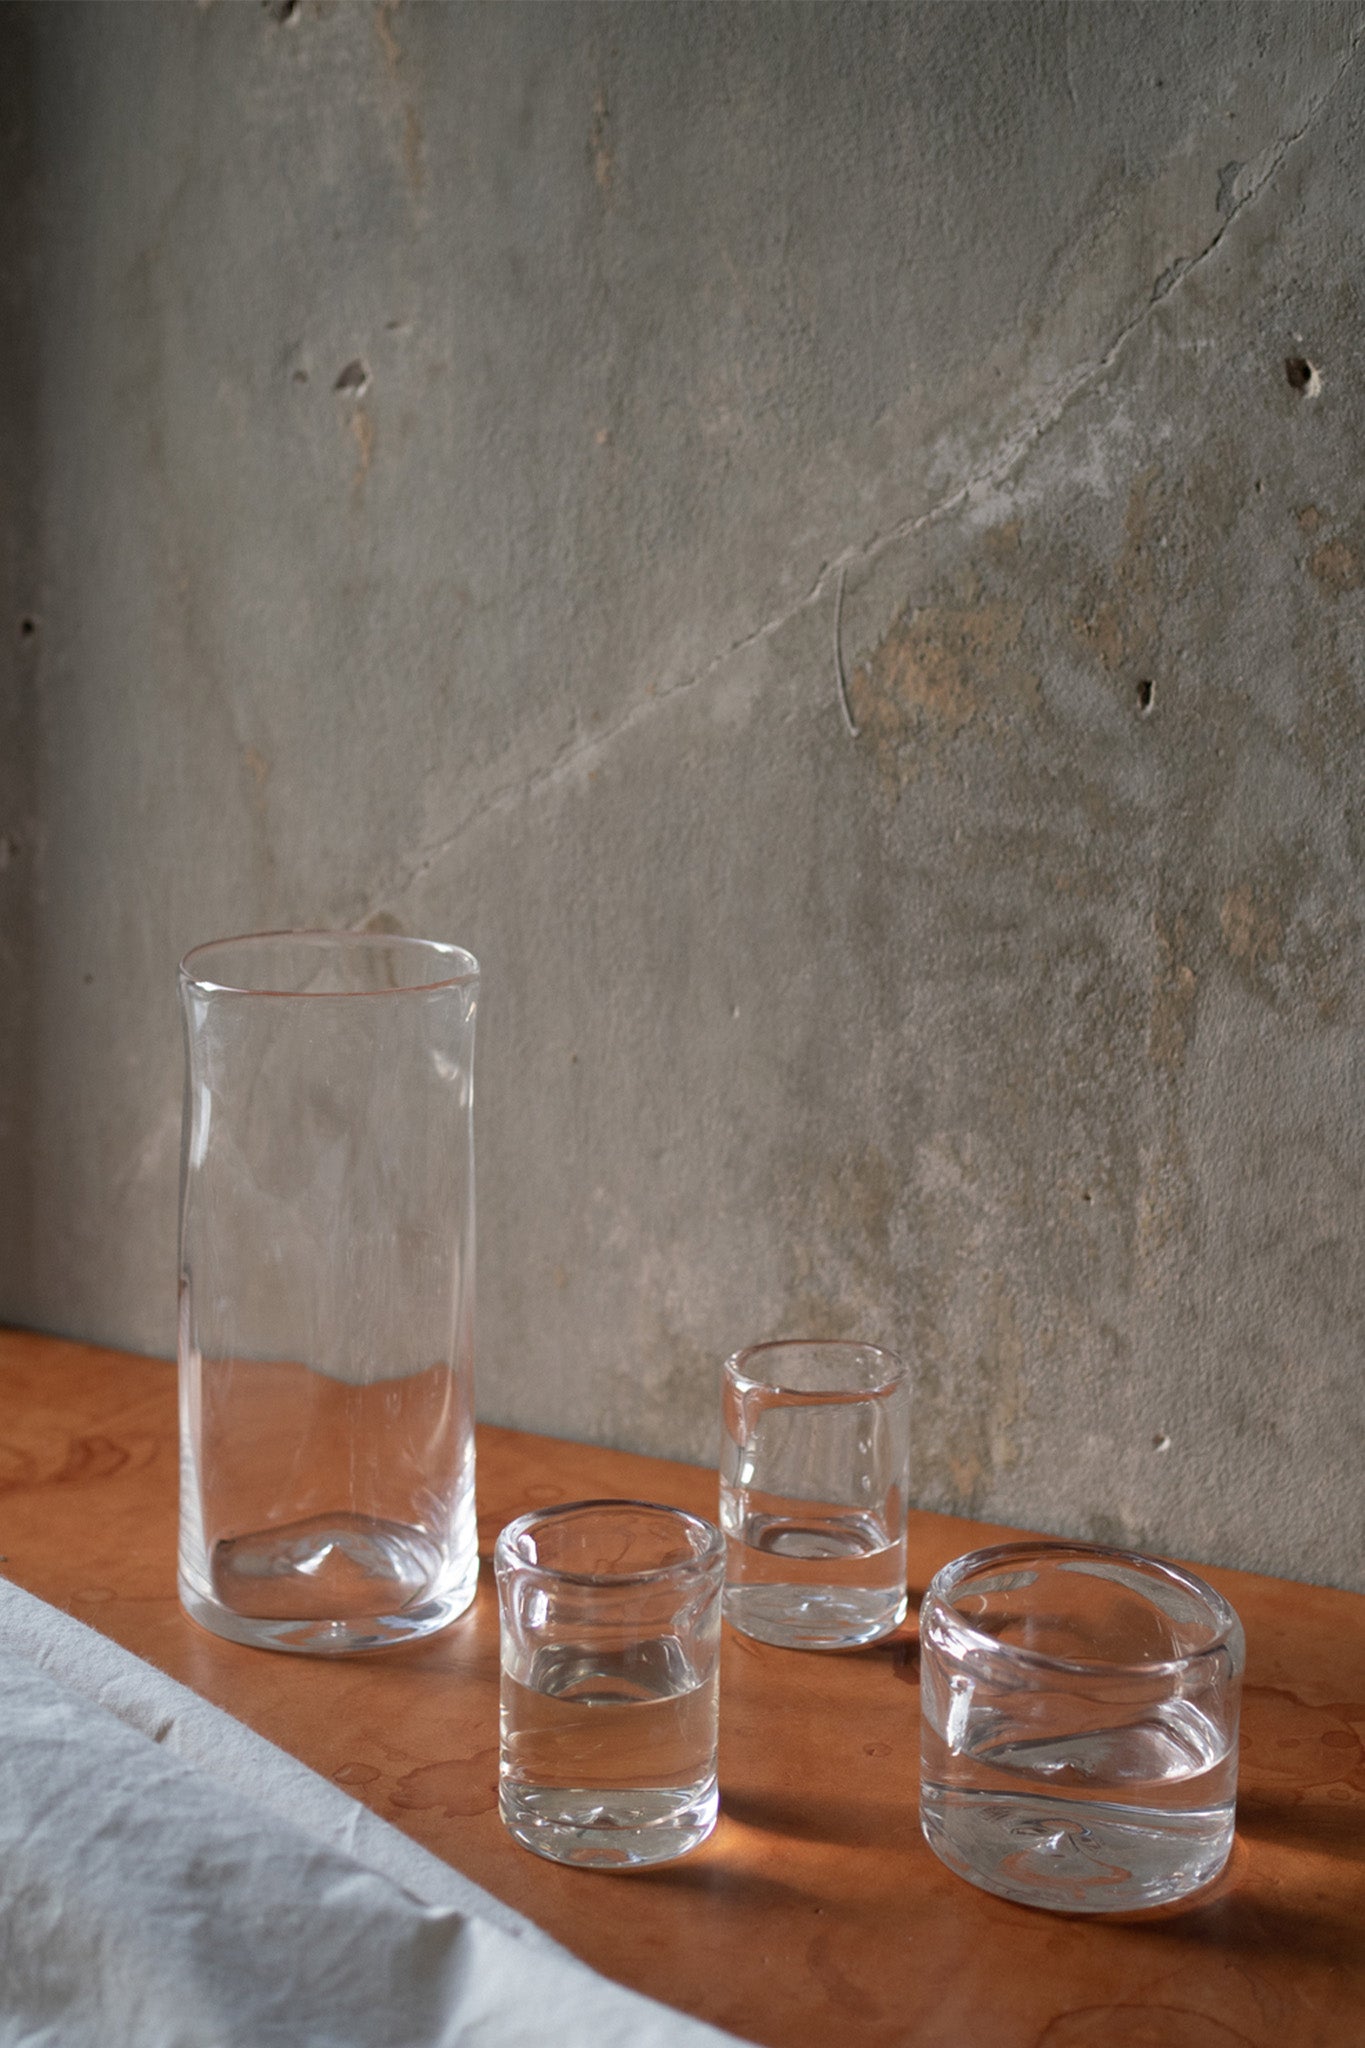 Frama 0405 Glass Wide with 0405 Glass Medium and 0405 Vase. Image by Frama